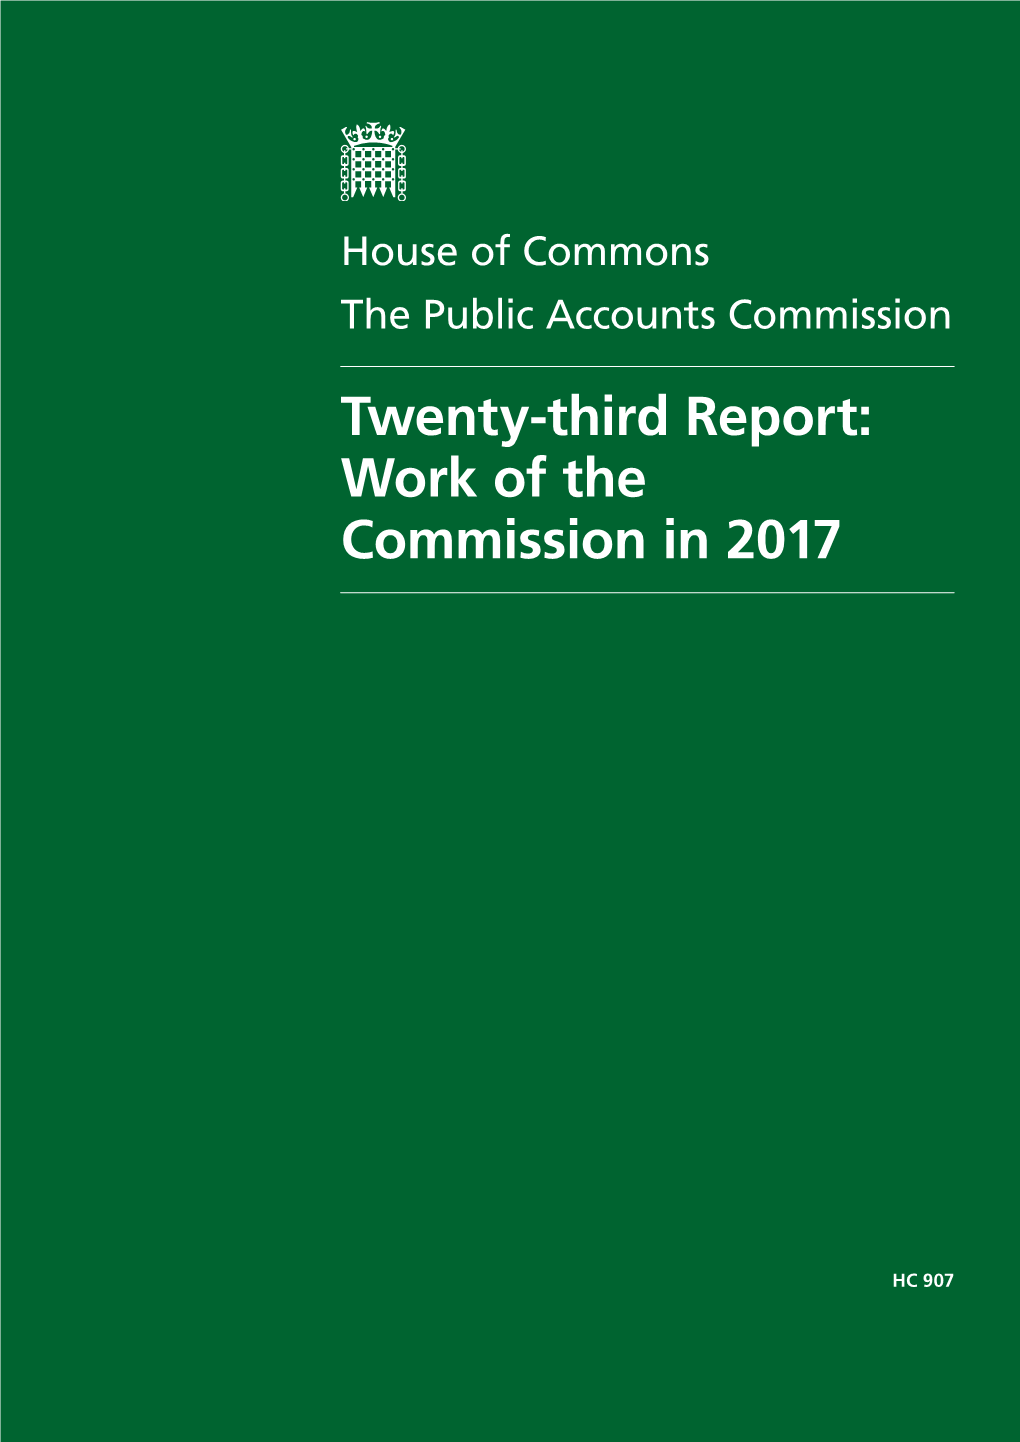 Twenty-Third Report: Work of the Commission in 2017 Presented To